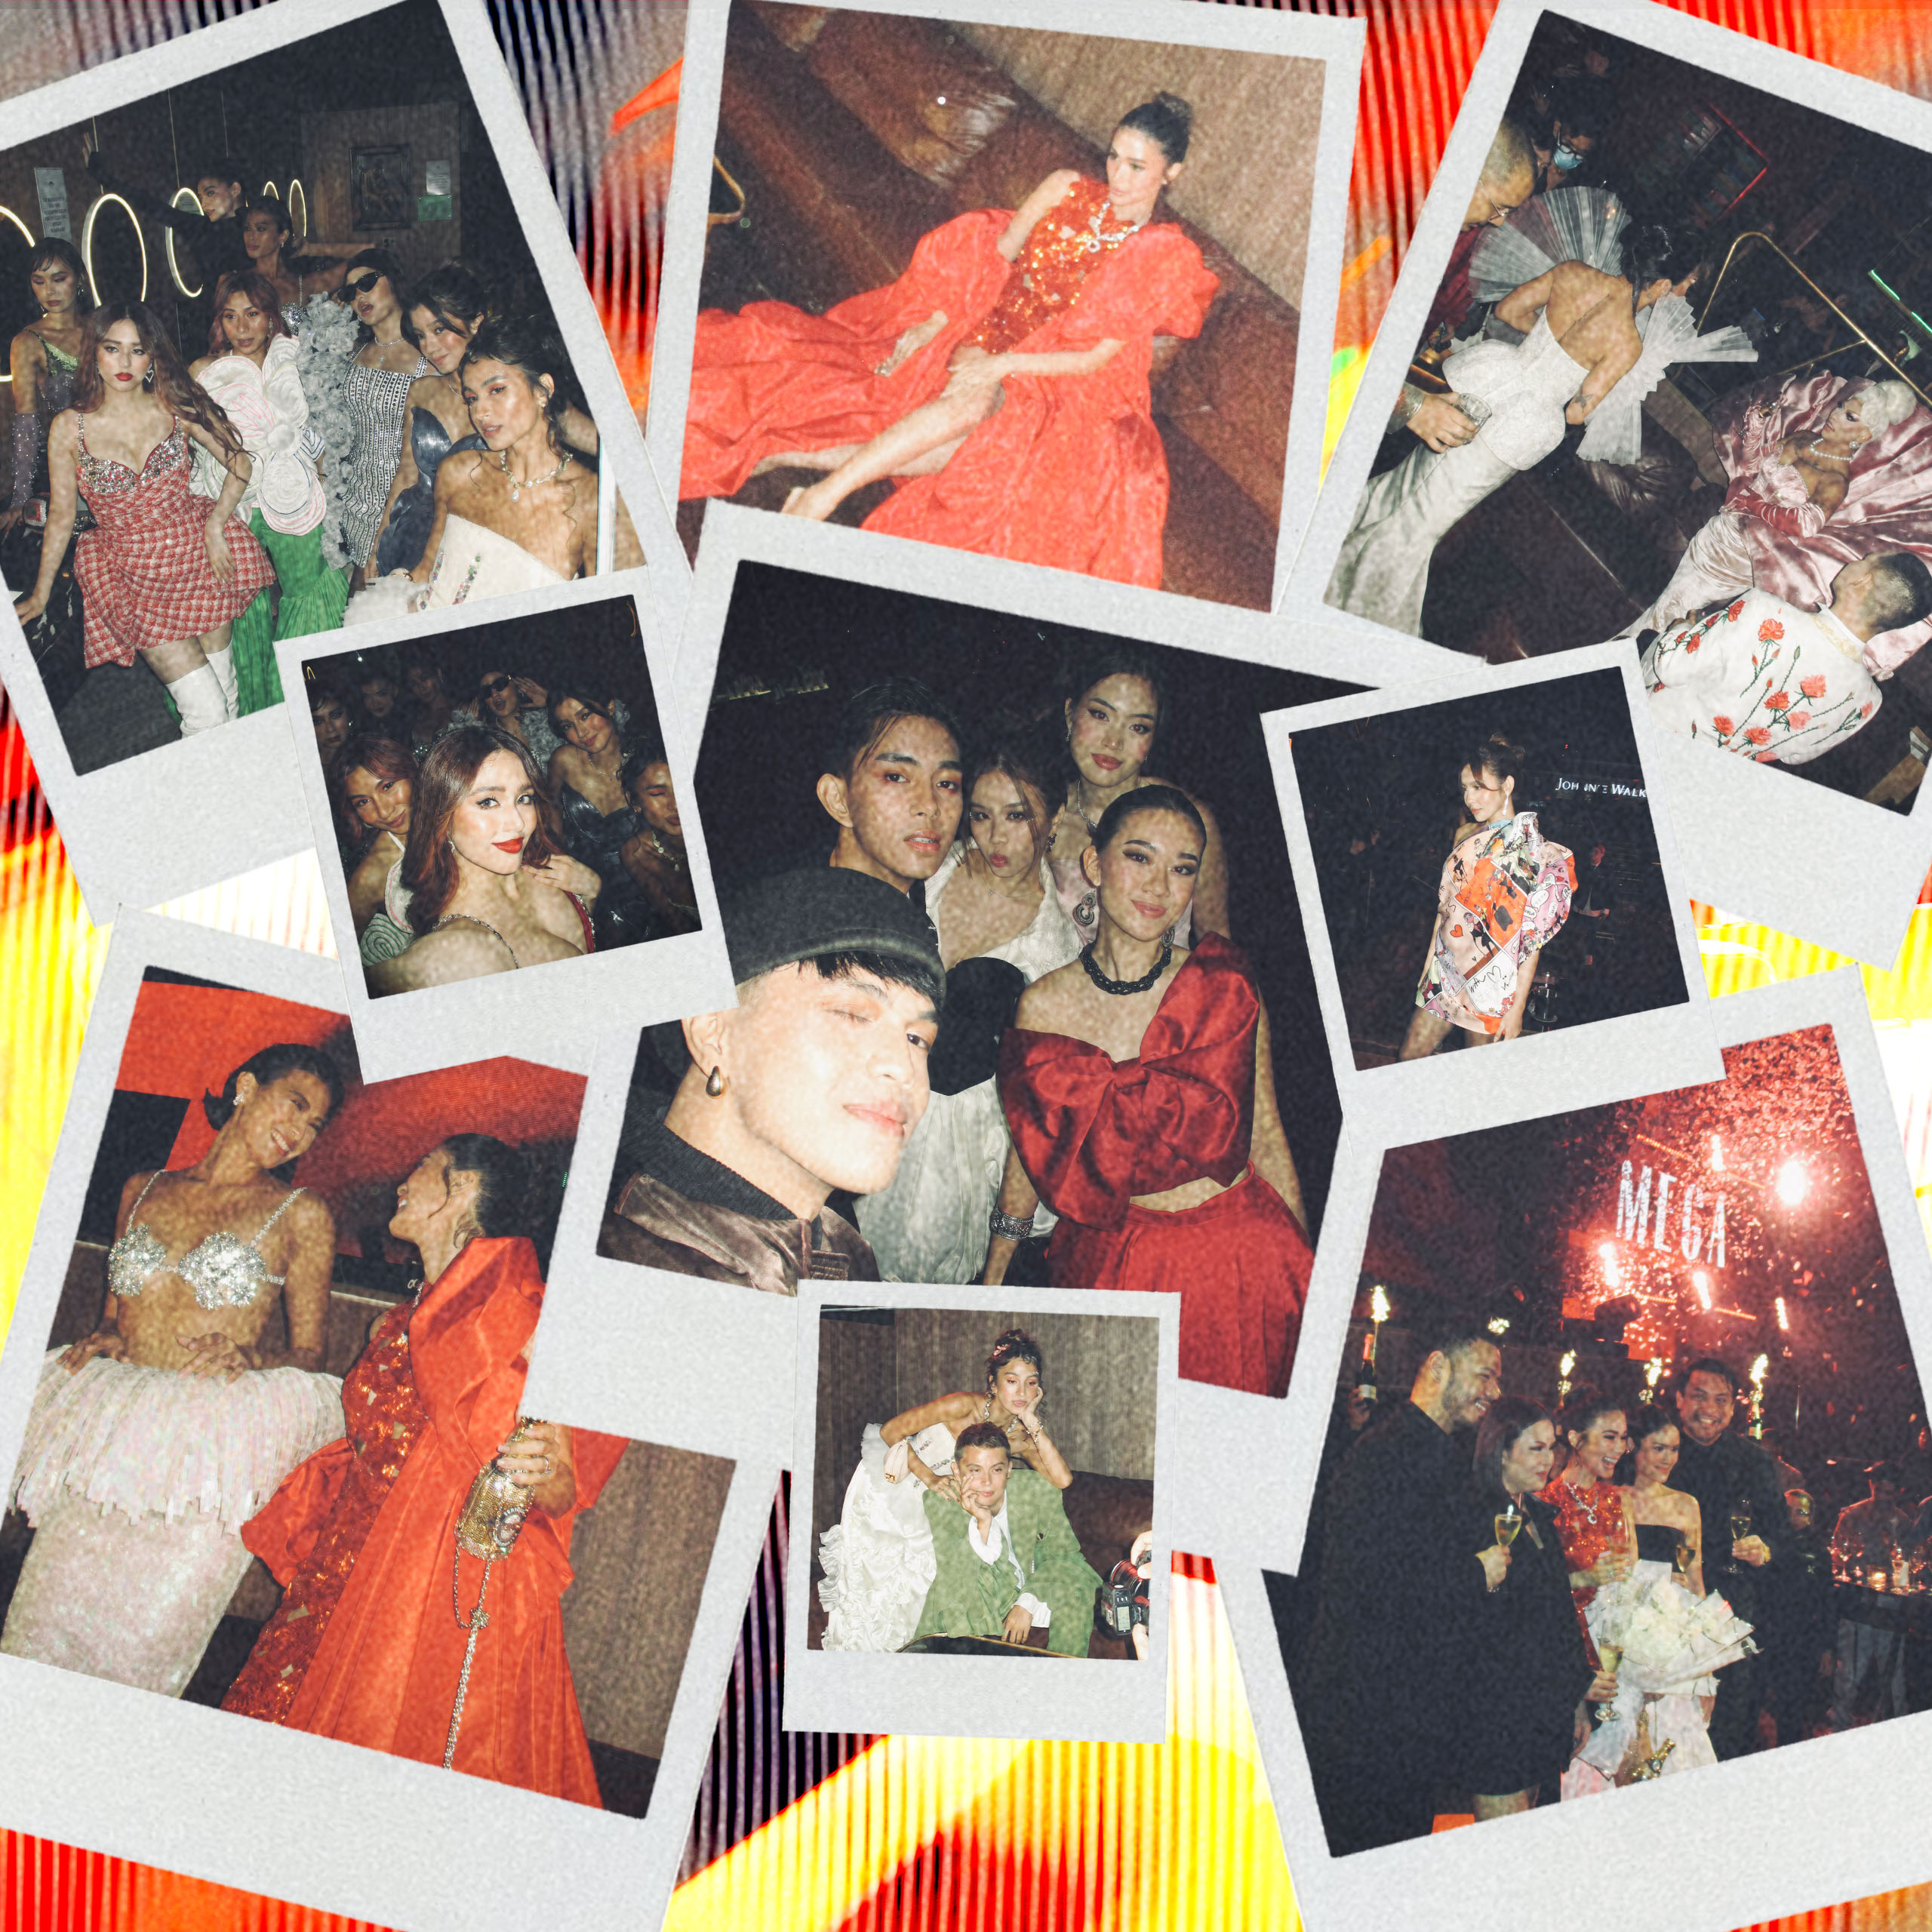 MEGAStyle Reveals Unseen Digicam Photos at MEGA's 32nd Anniversary Party